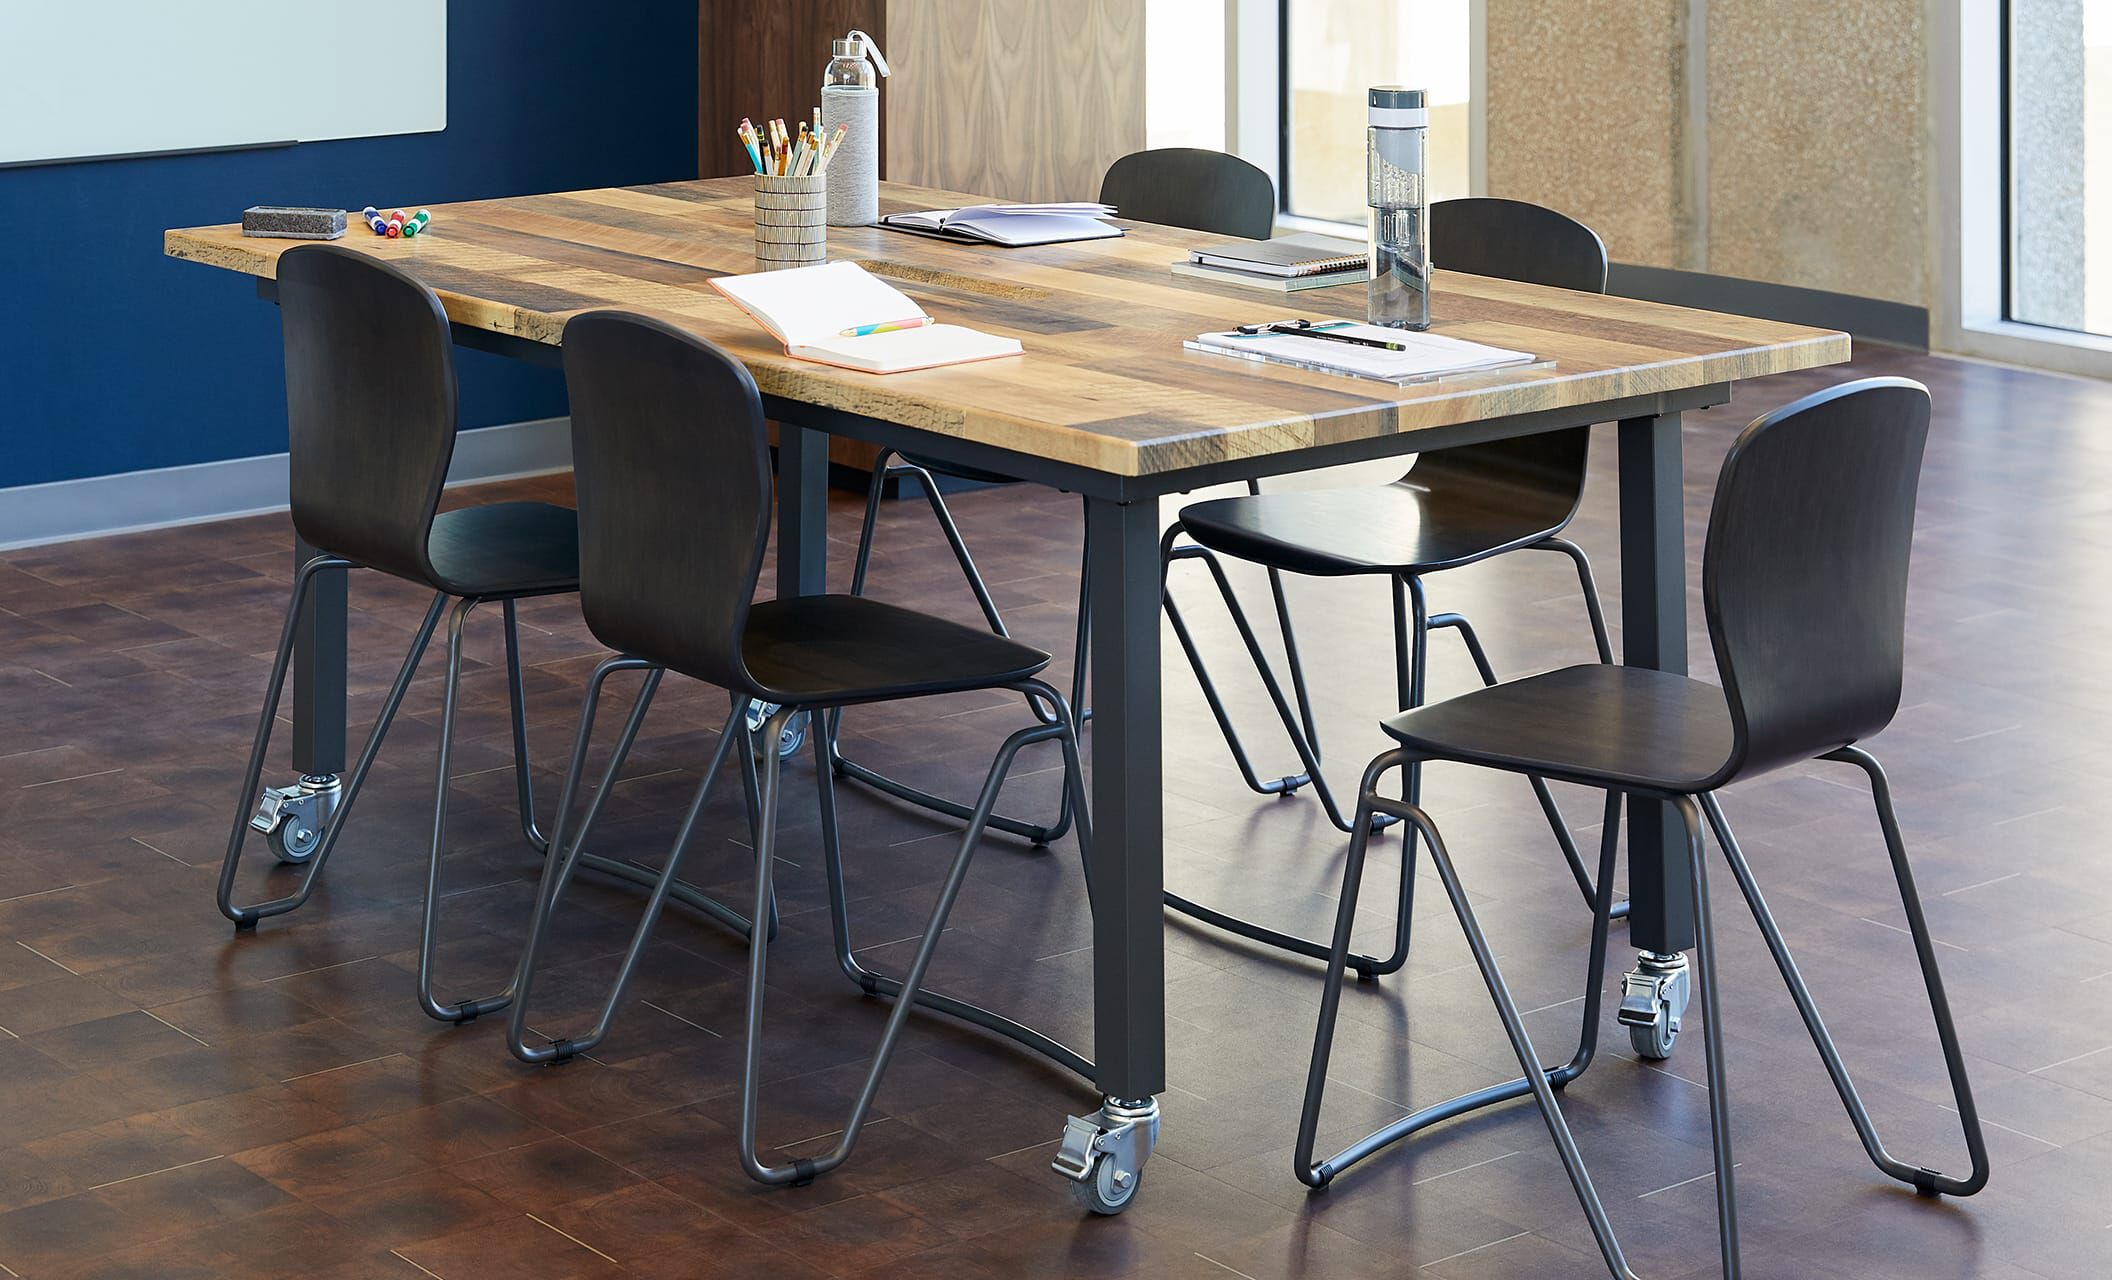 Vari Conference Table for Meetings on Wheels Industrial Meeting Table for Up to Six People Black ADA Compliant and Commercial-Grade Office Furniture - Roll-and-Lock Casters 